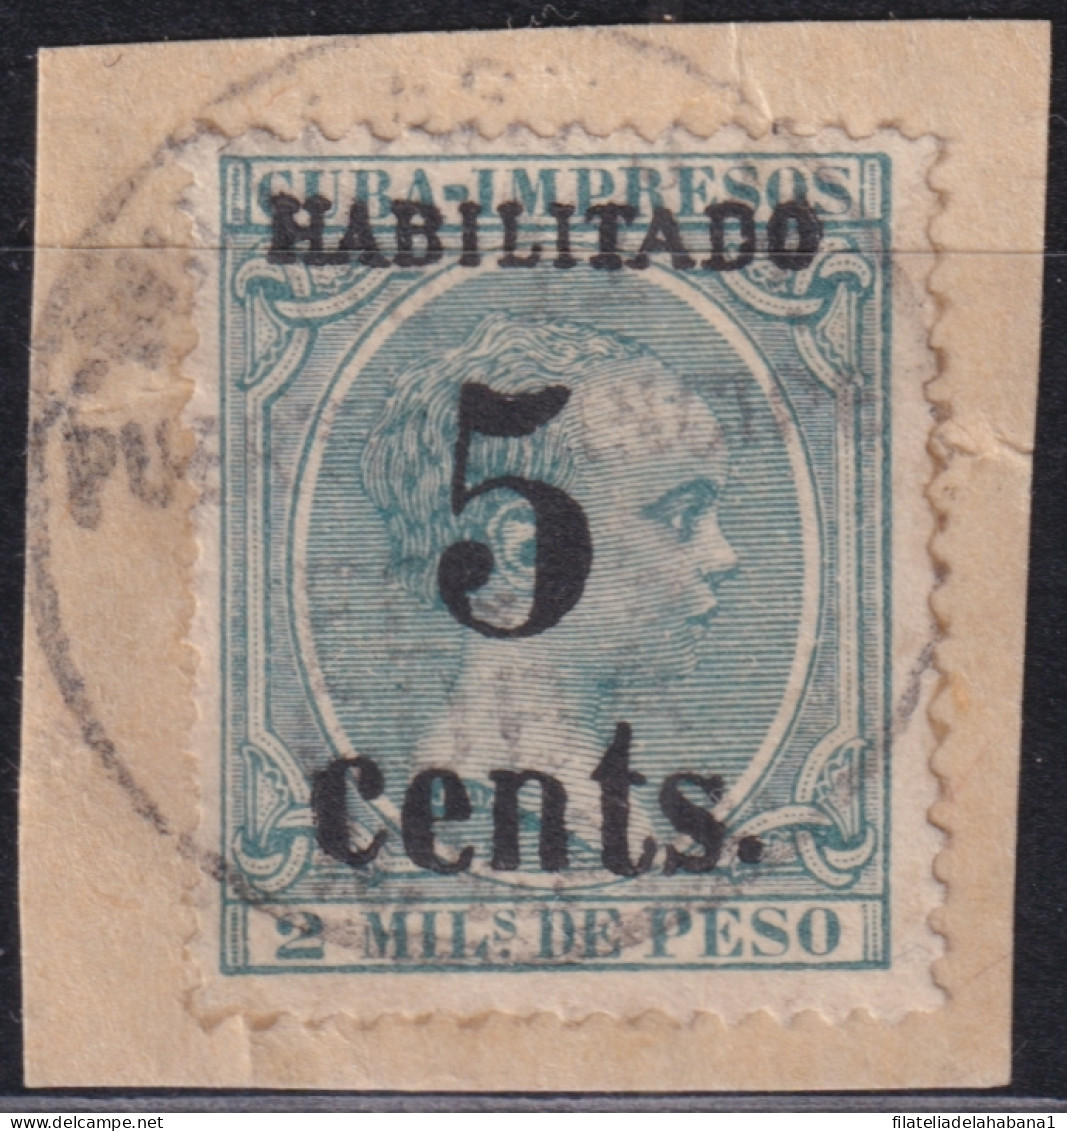 1899-699 CUBA US OCCUPATION PUERTO PRINCIPE 1899 5º ISSUE 5c S. 2mls DANGEROUS FORGERY USED.  - Gebraucht